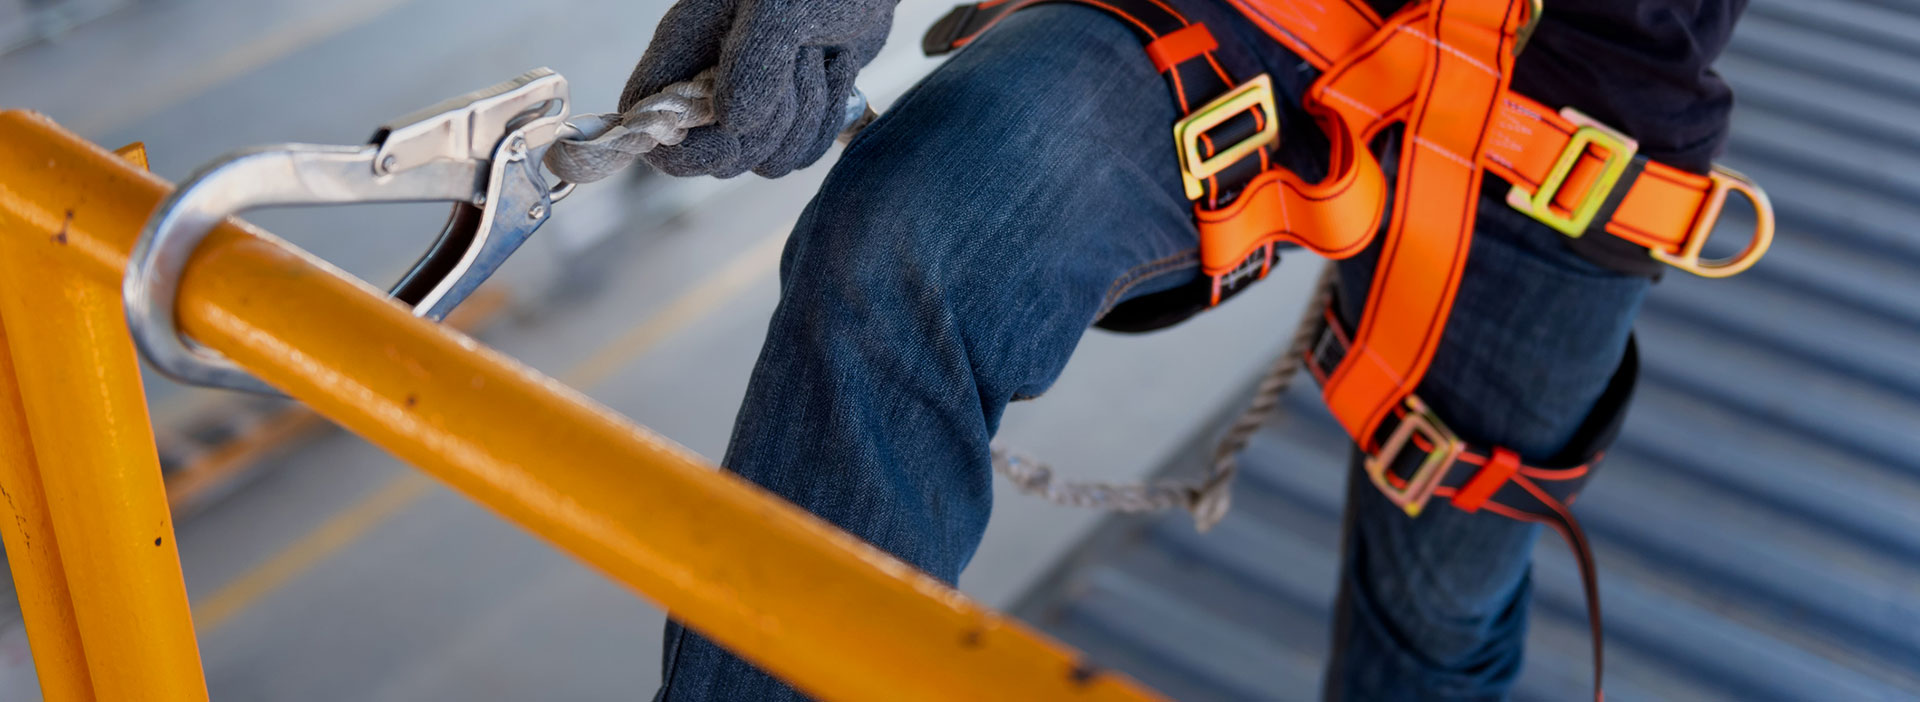 ANSI-ASSE Z359.11 Safety Requirements for Whole Body Harnesses